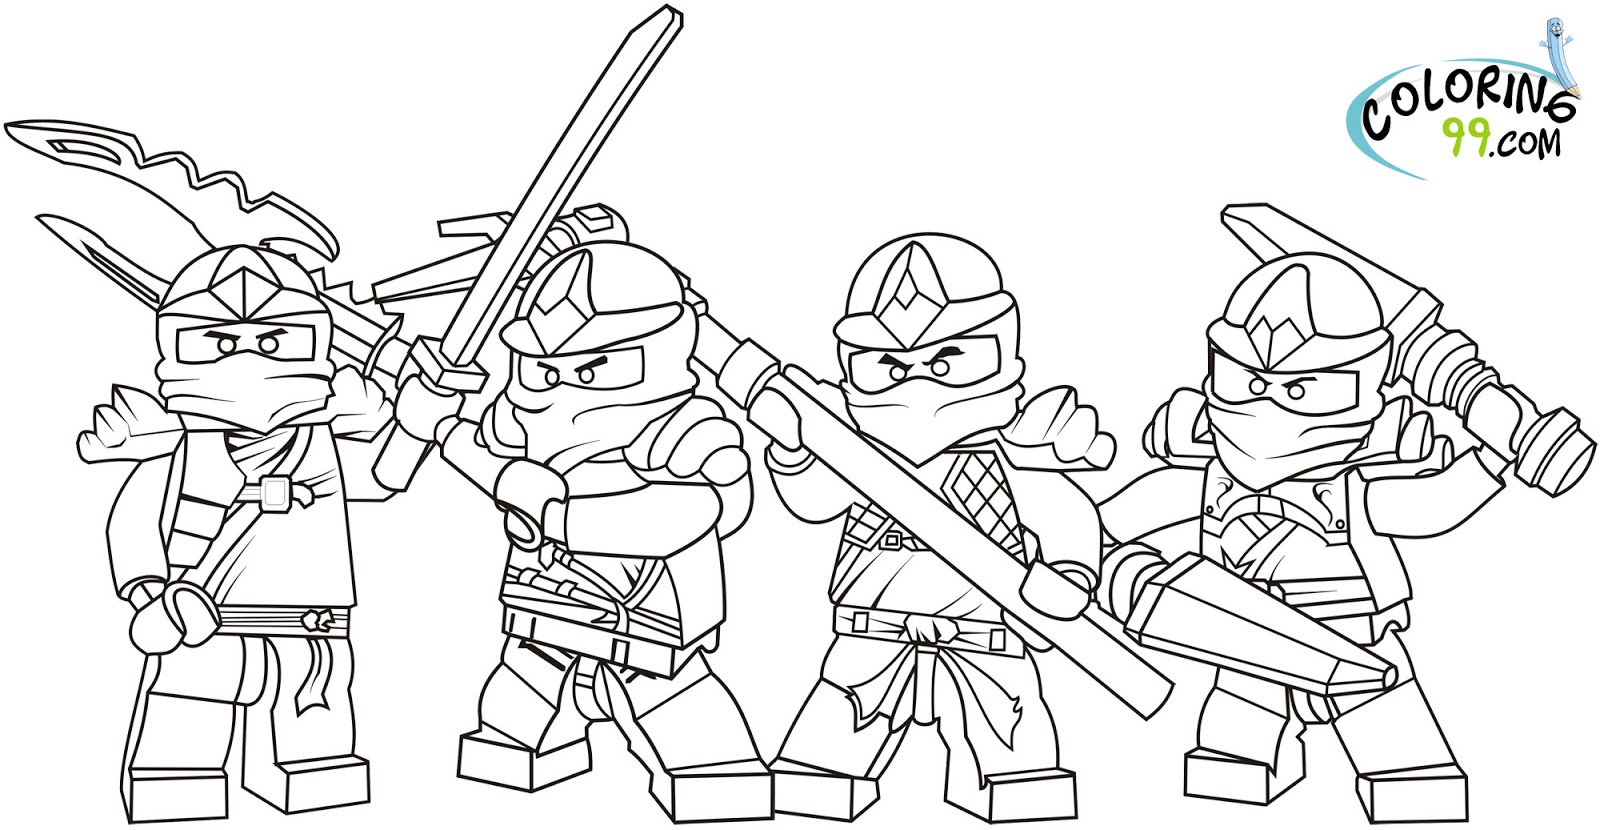  Fighting Lego Ninjago Free  Coloring Pages – Free Printable Pictures Coloring Pages